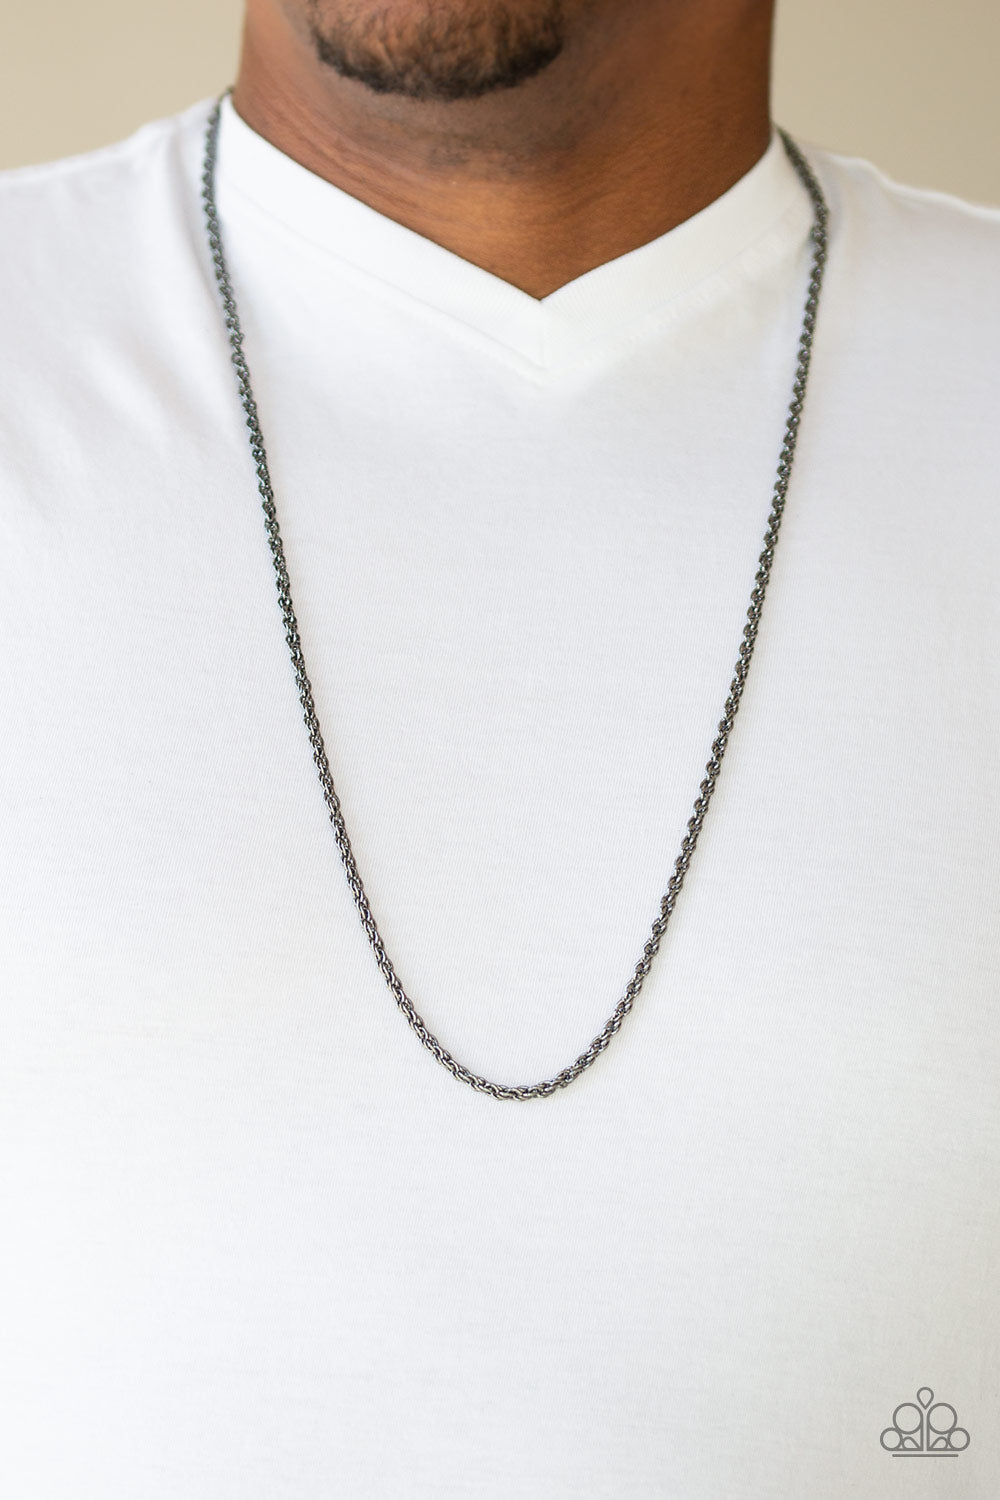 The Go-To Guy Black Necklace